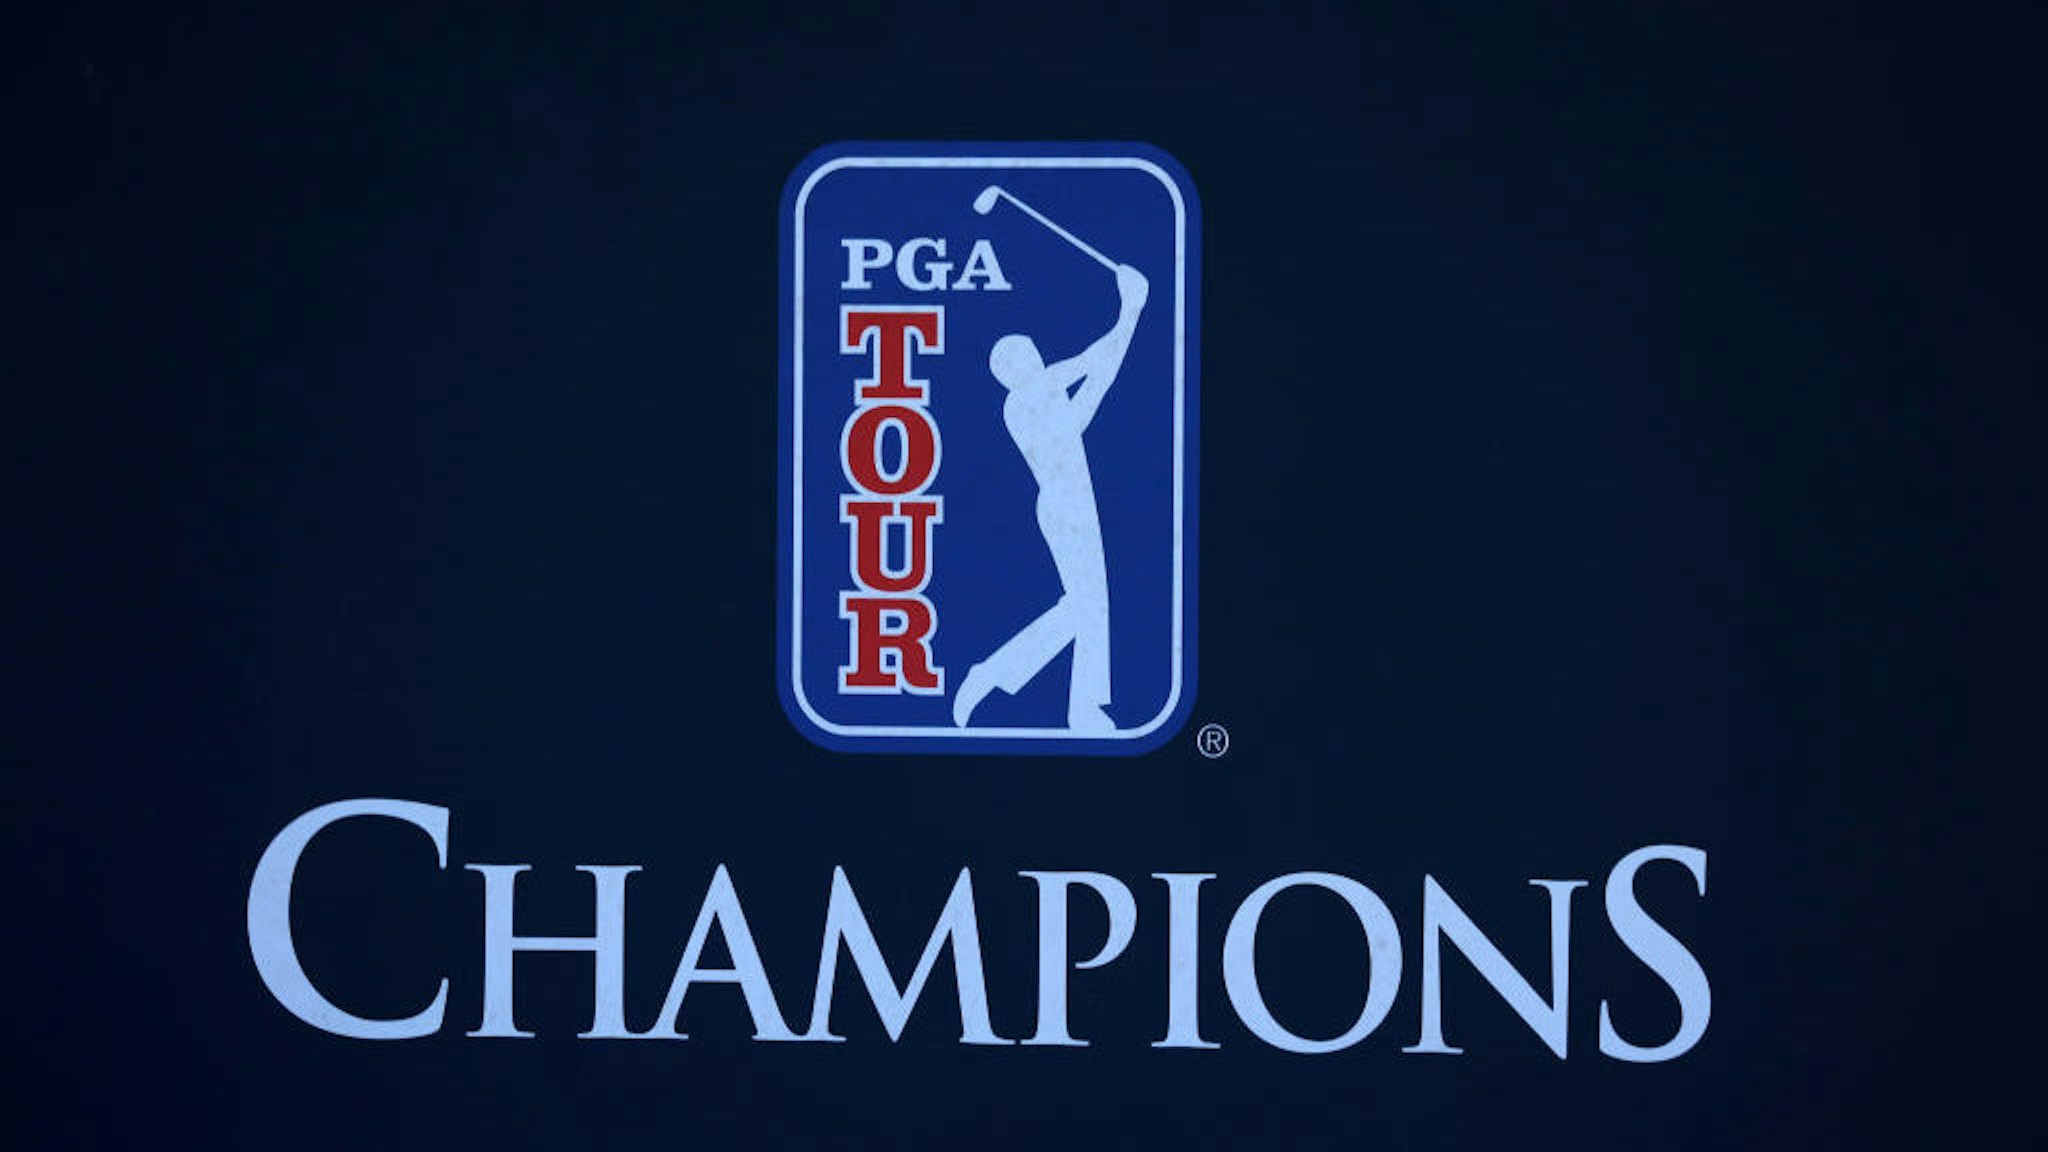 BIRMINGHAM, AL - MAY 15: A general view of the Champions Tour logo during the final round of the PGA Champions Tour Regions Tradition on May 15, 2022 at Greystone Golf and Country Club in Birmingham, Alabama. (Photo by Michael Wade/Icon Sportswire)